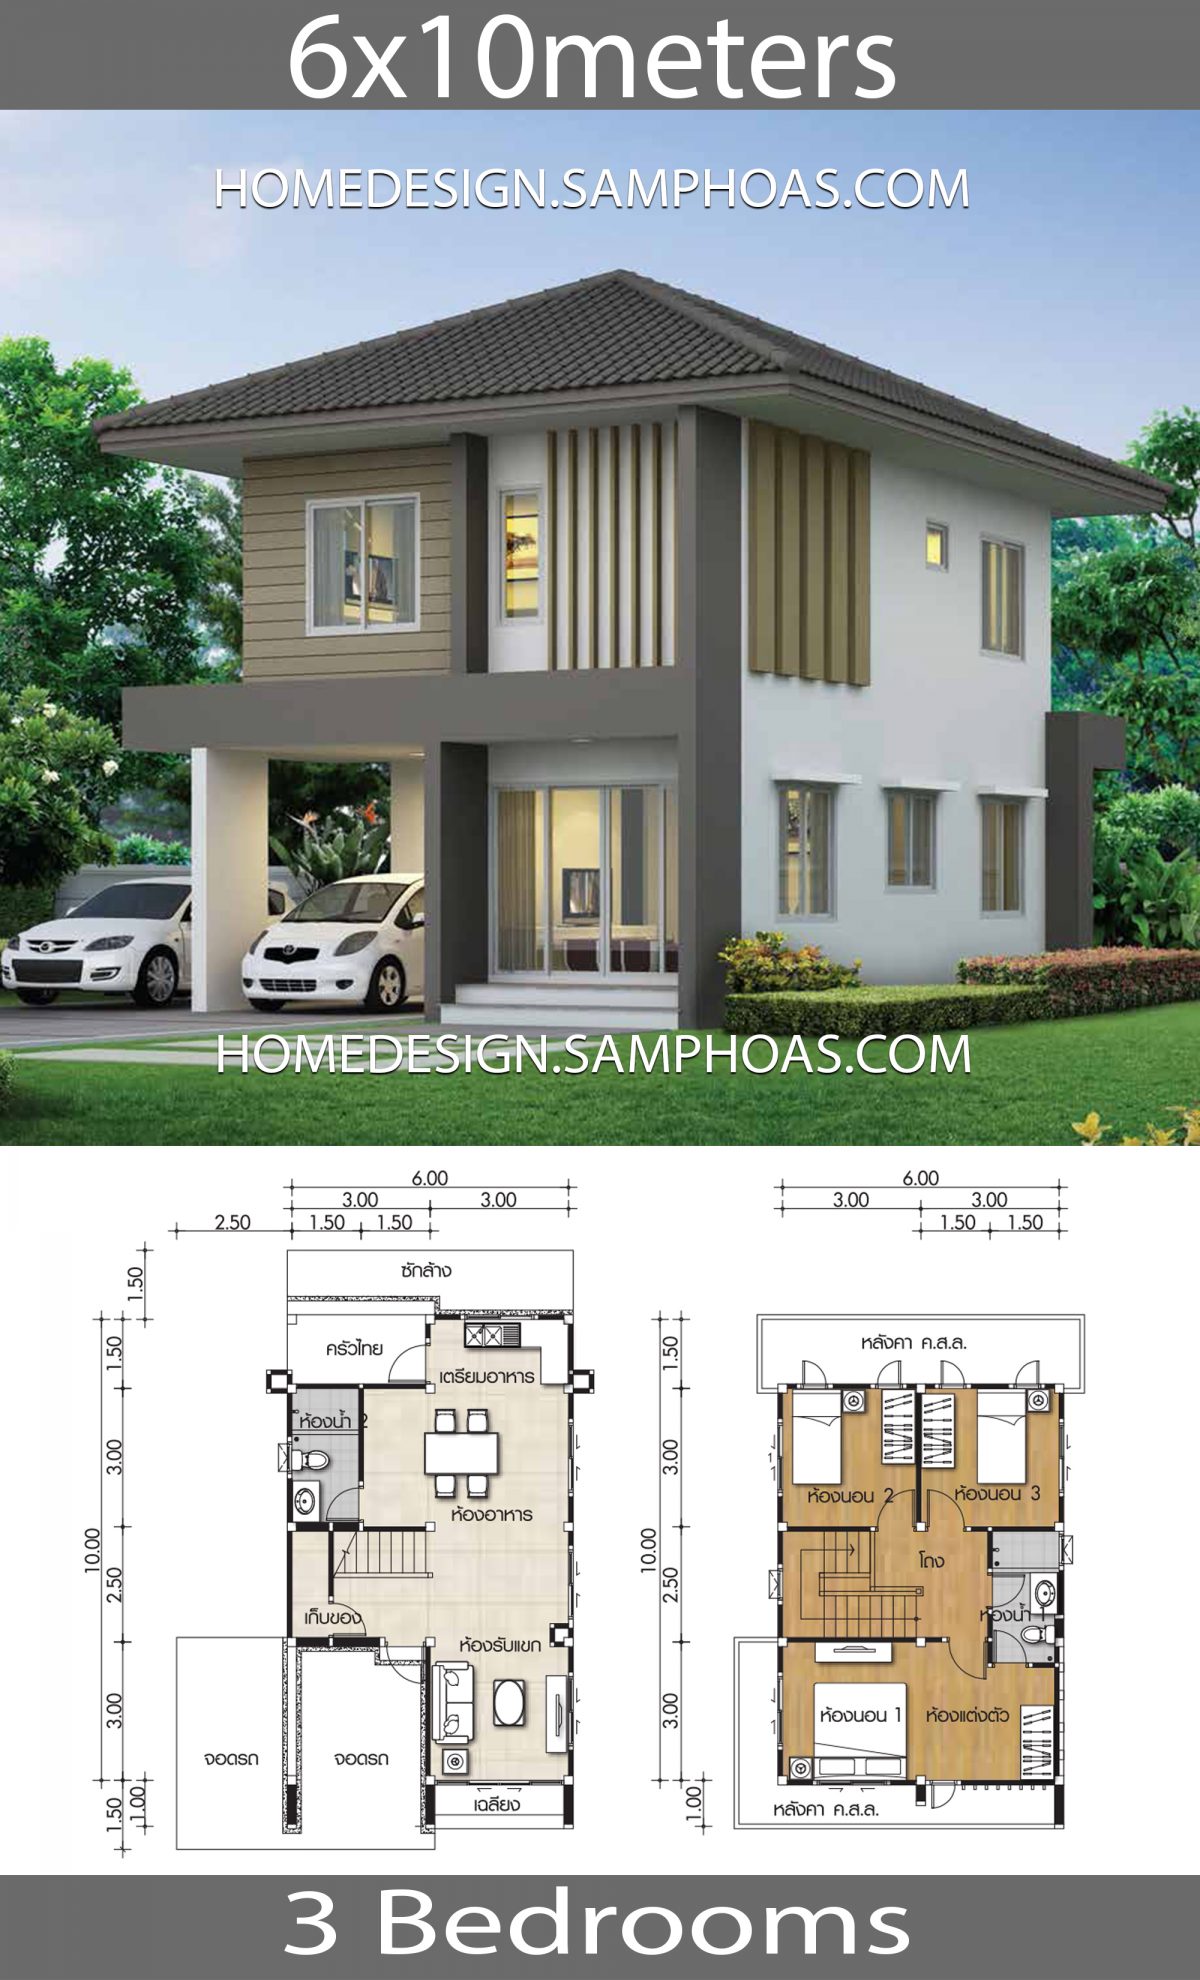 20 House Design With Layout plans you wish to see